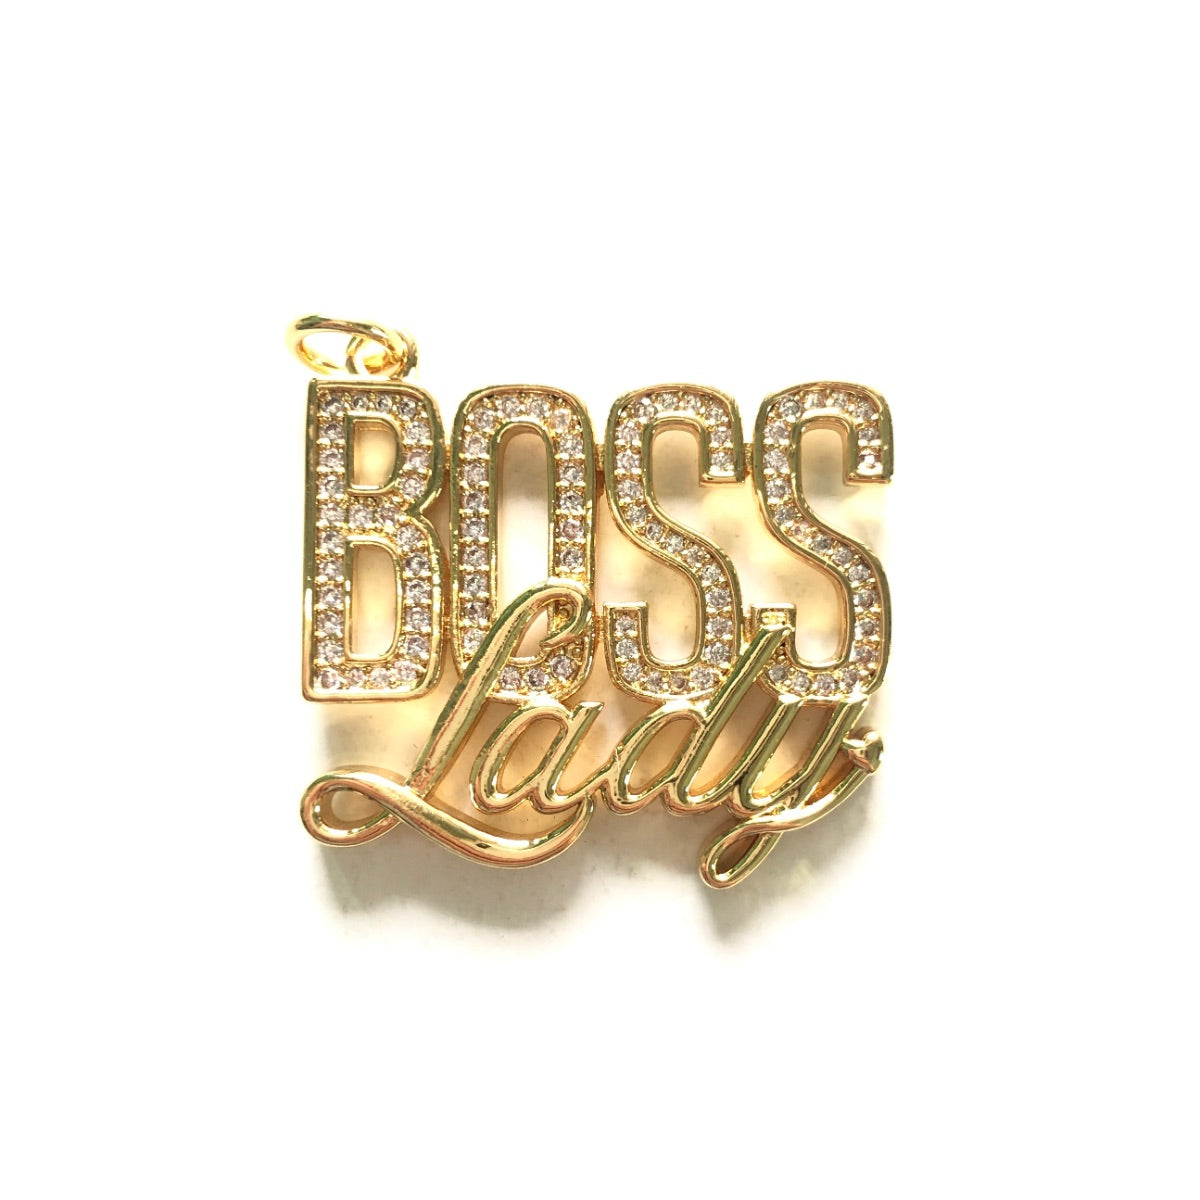 10pcs/lot 31*27.5mm CZ Pave Boss Lady Word Charms Gold CZ Paved Charms New Charms Arrivals Words & Quotes Charms Beads Beyond